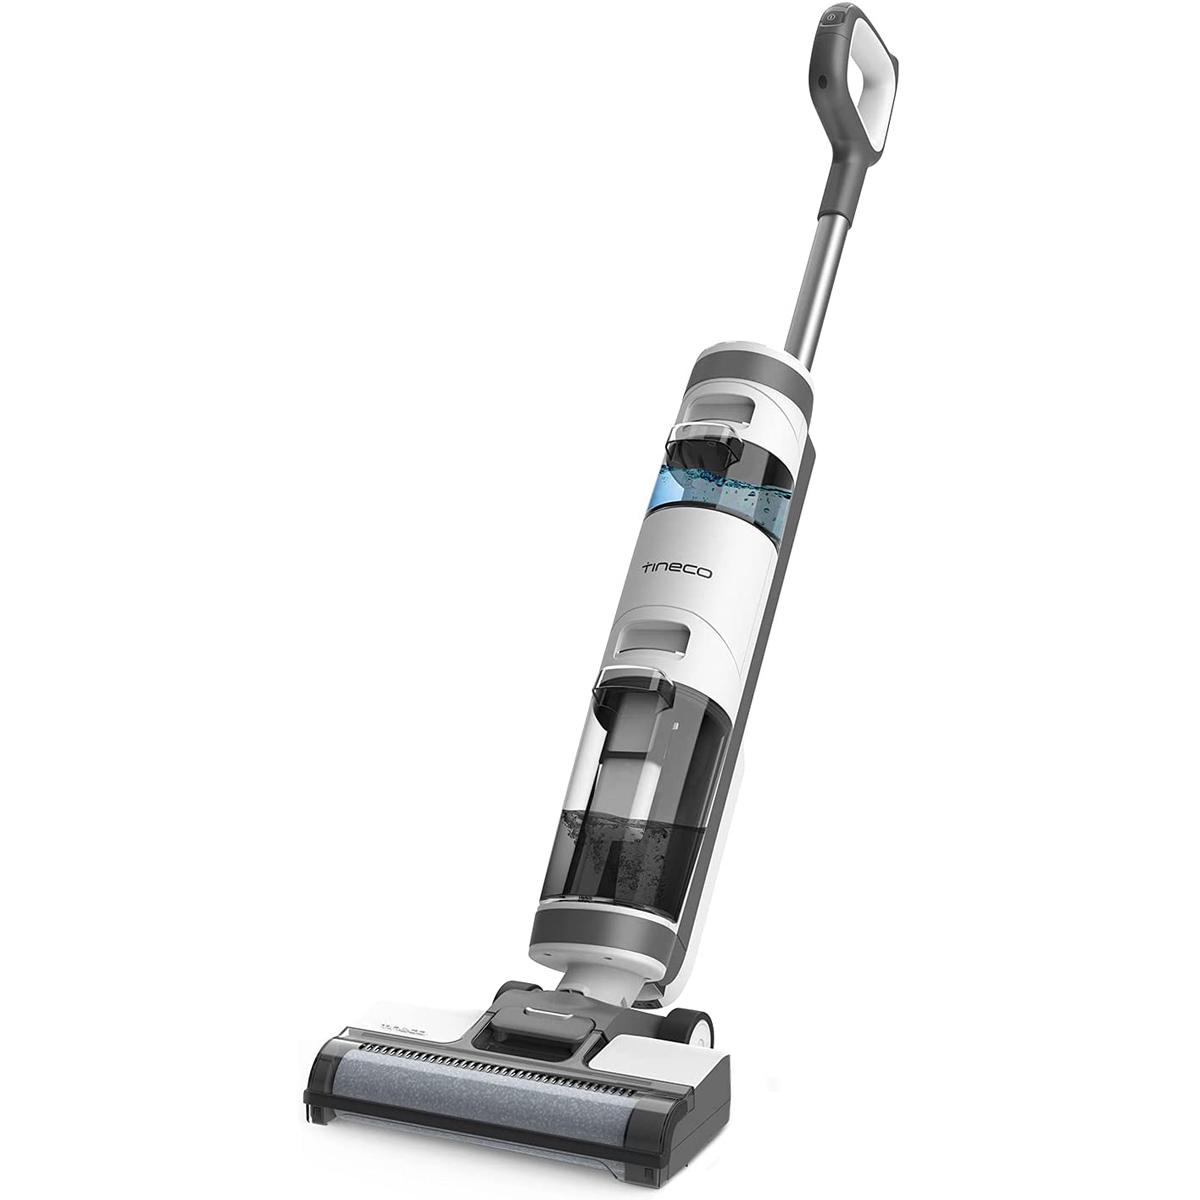 Tineco iFLOOR3 Cordless Wet Dry Vacuum Cleaner for $224.99 Shipped